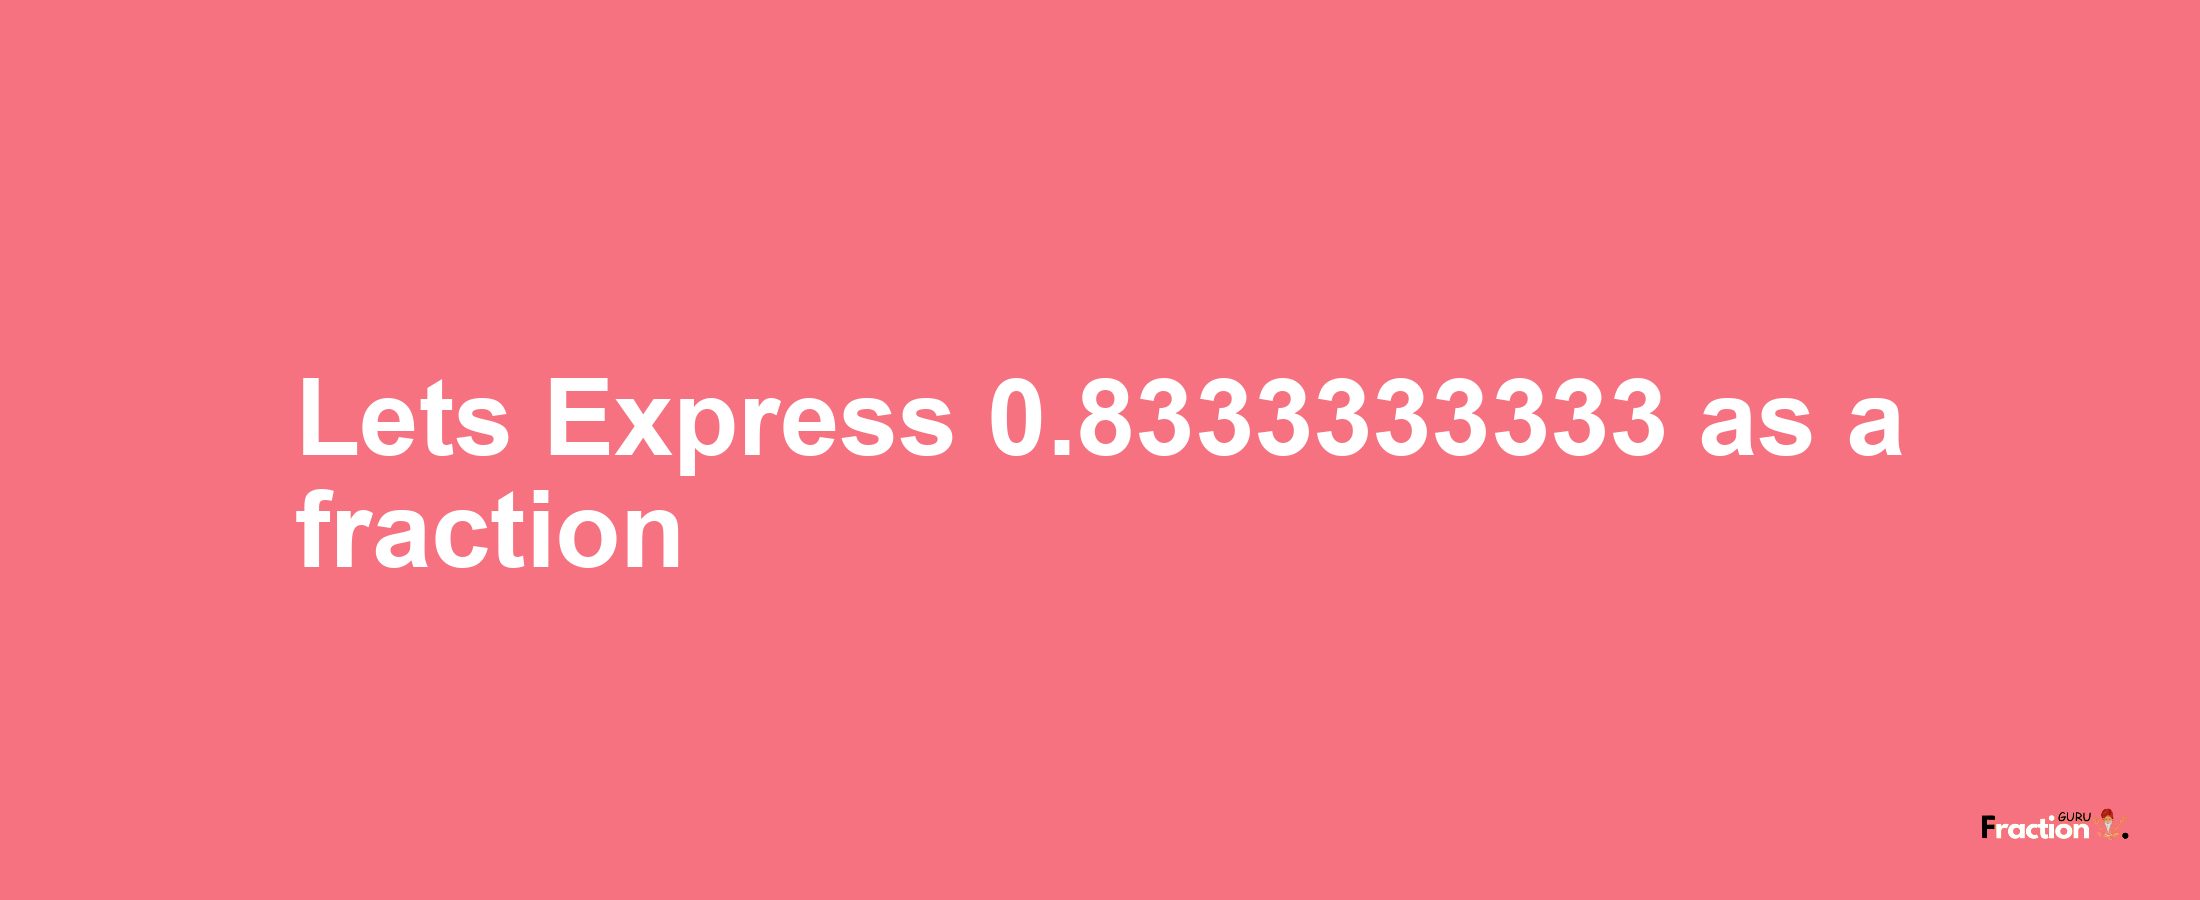 Lets Express 0.8333333333 as afraction